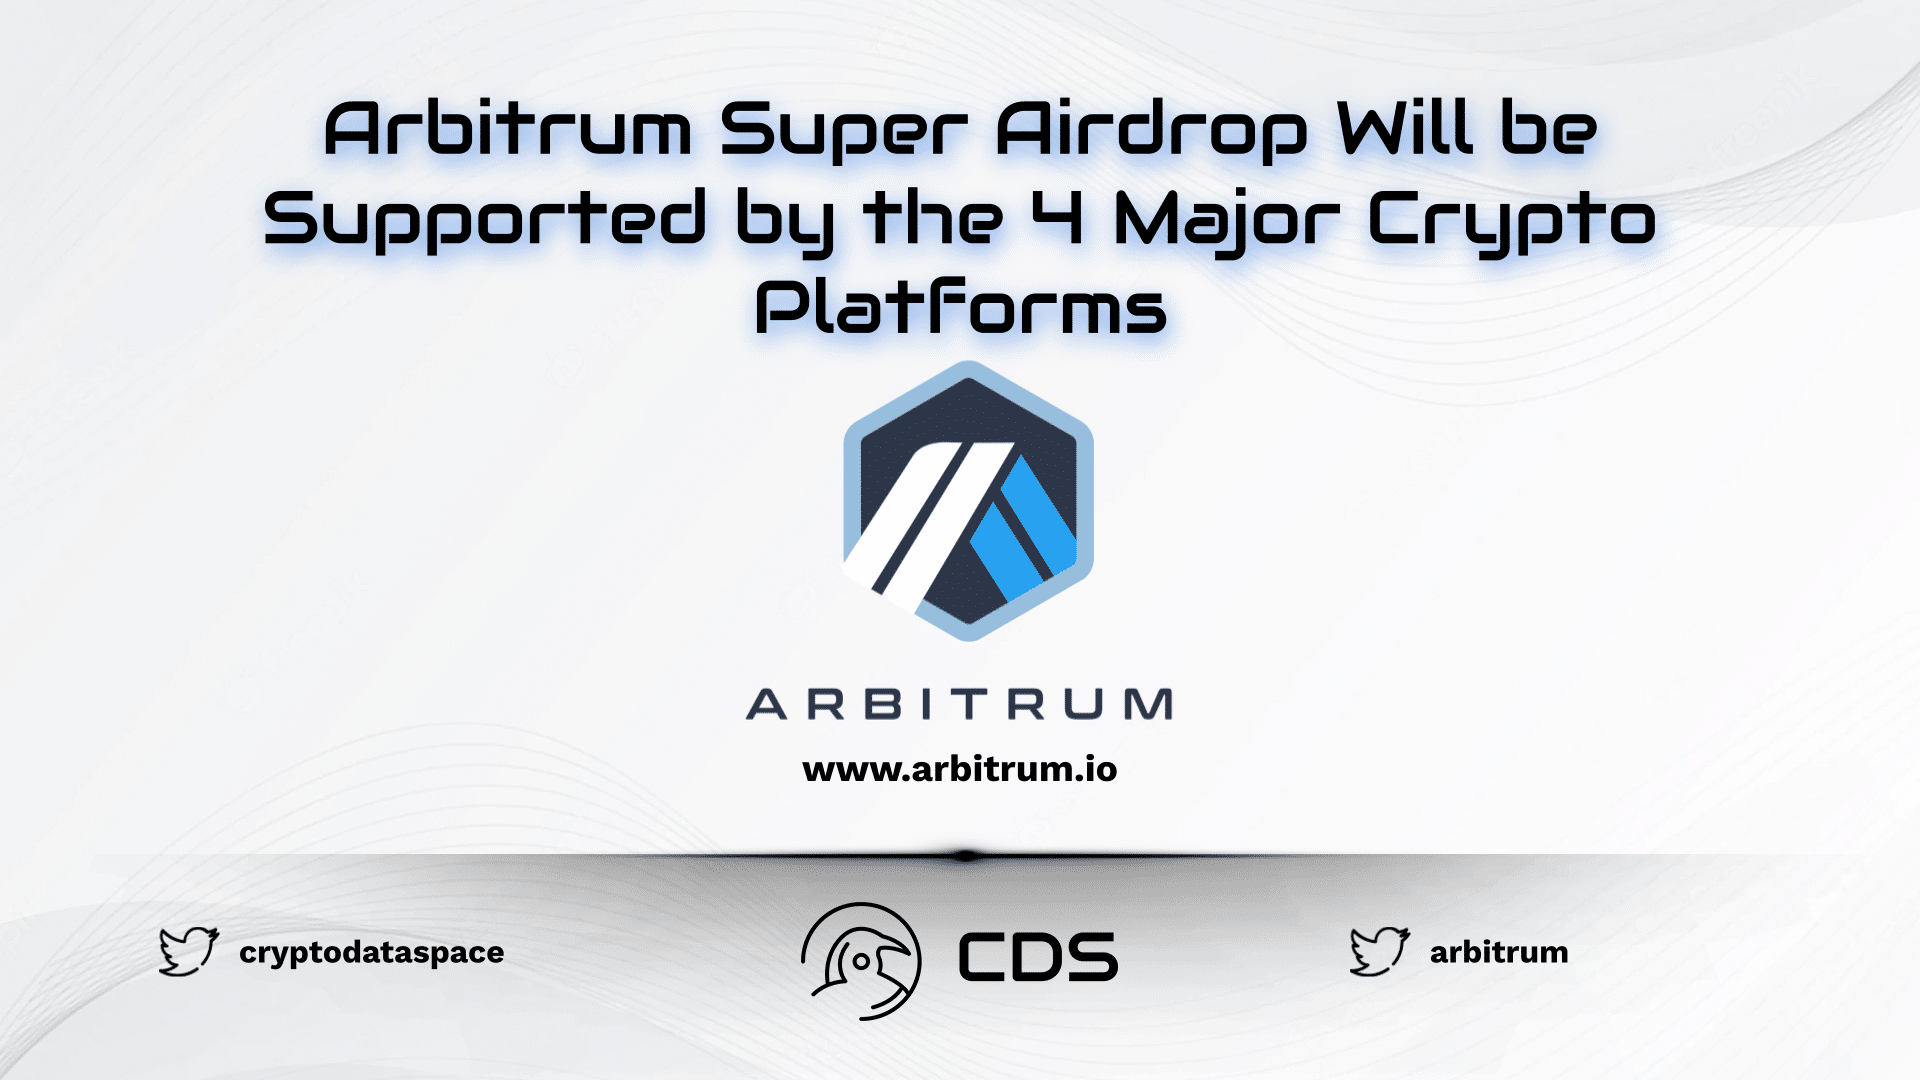 Arbitrum Super Airdrop Will be Supported by the 4 Major Crypto Platforms